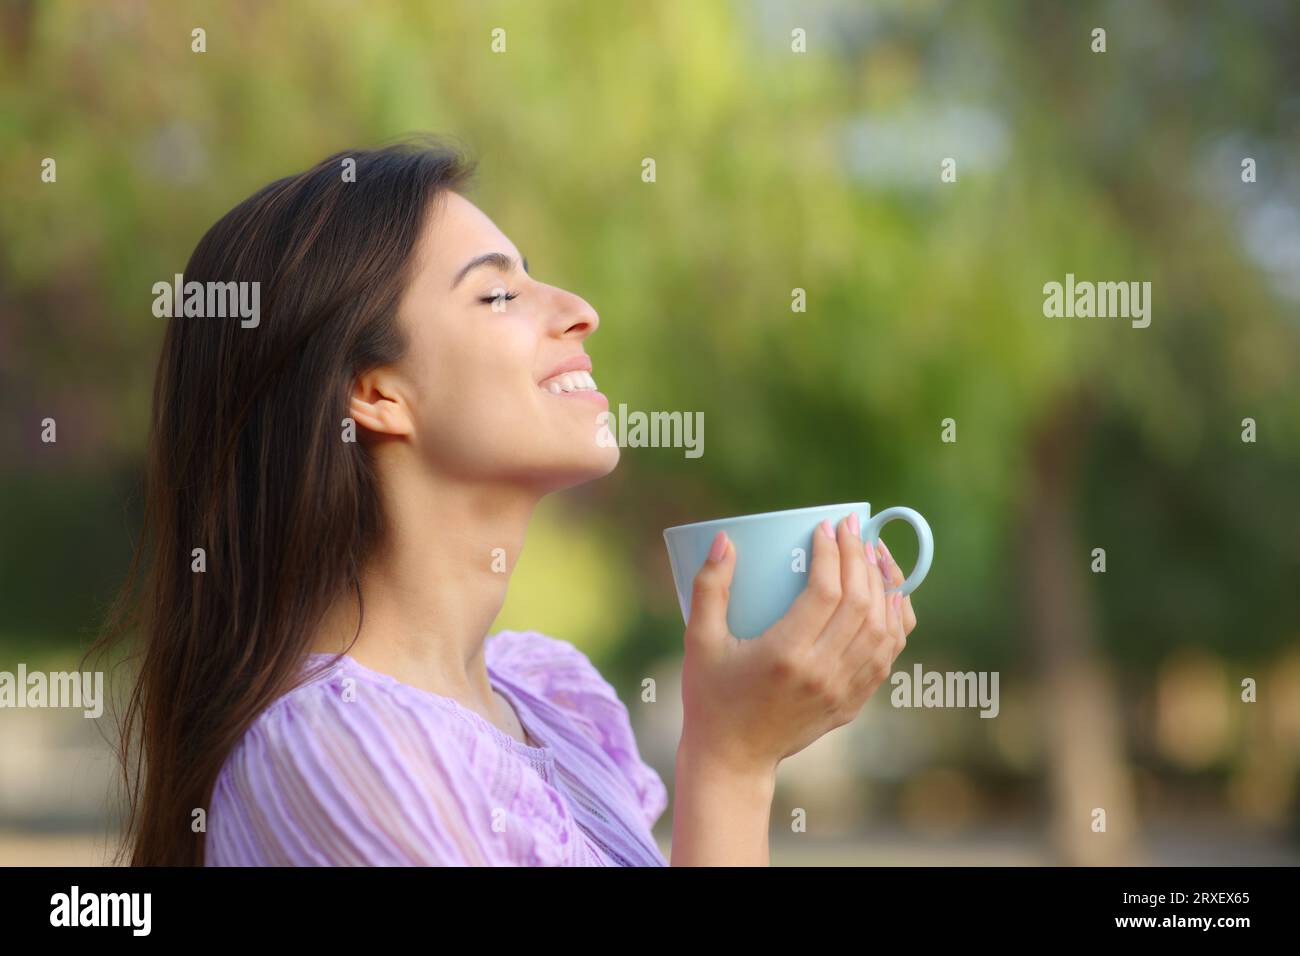 Profile of a happy woman drinking and breathing in a park Stock Photo